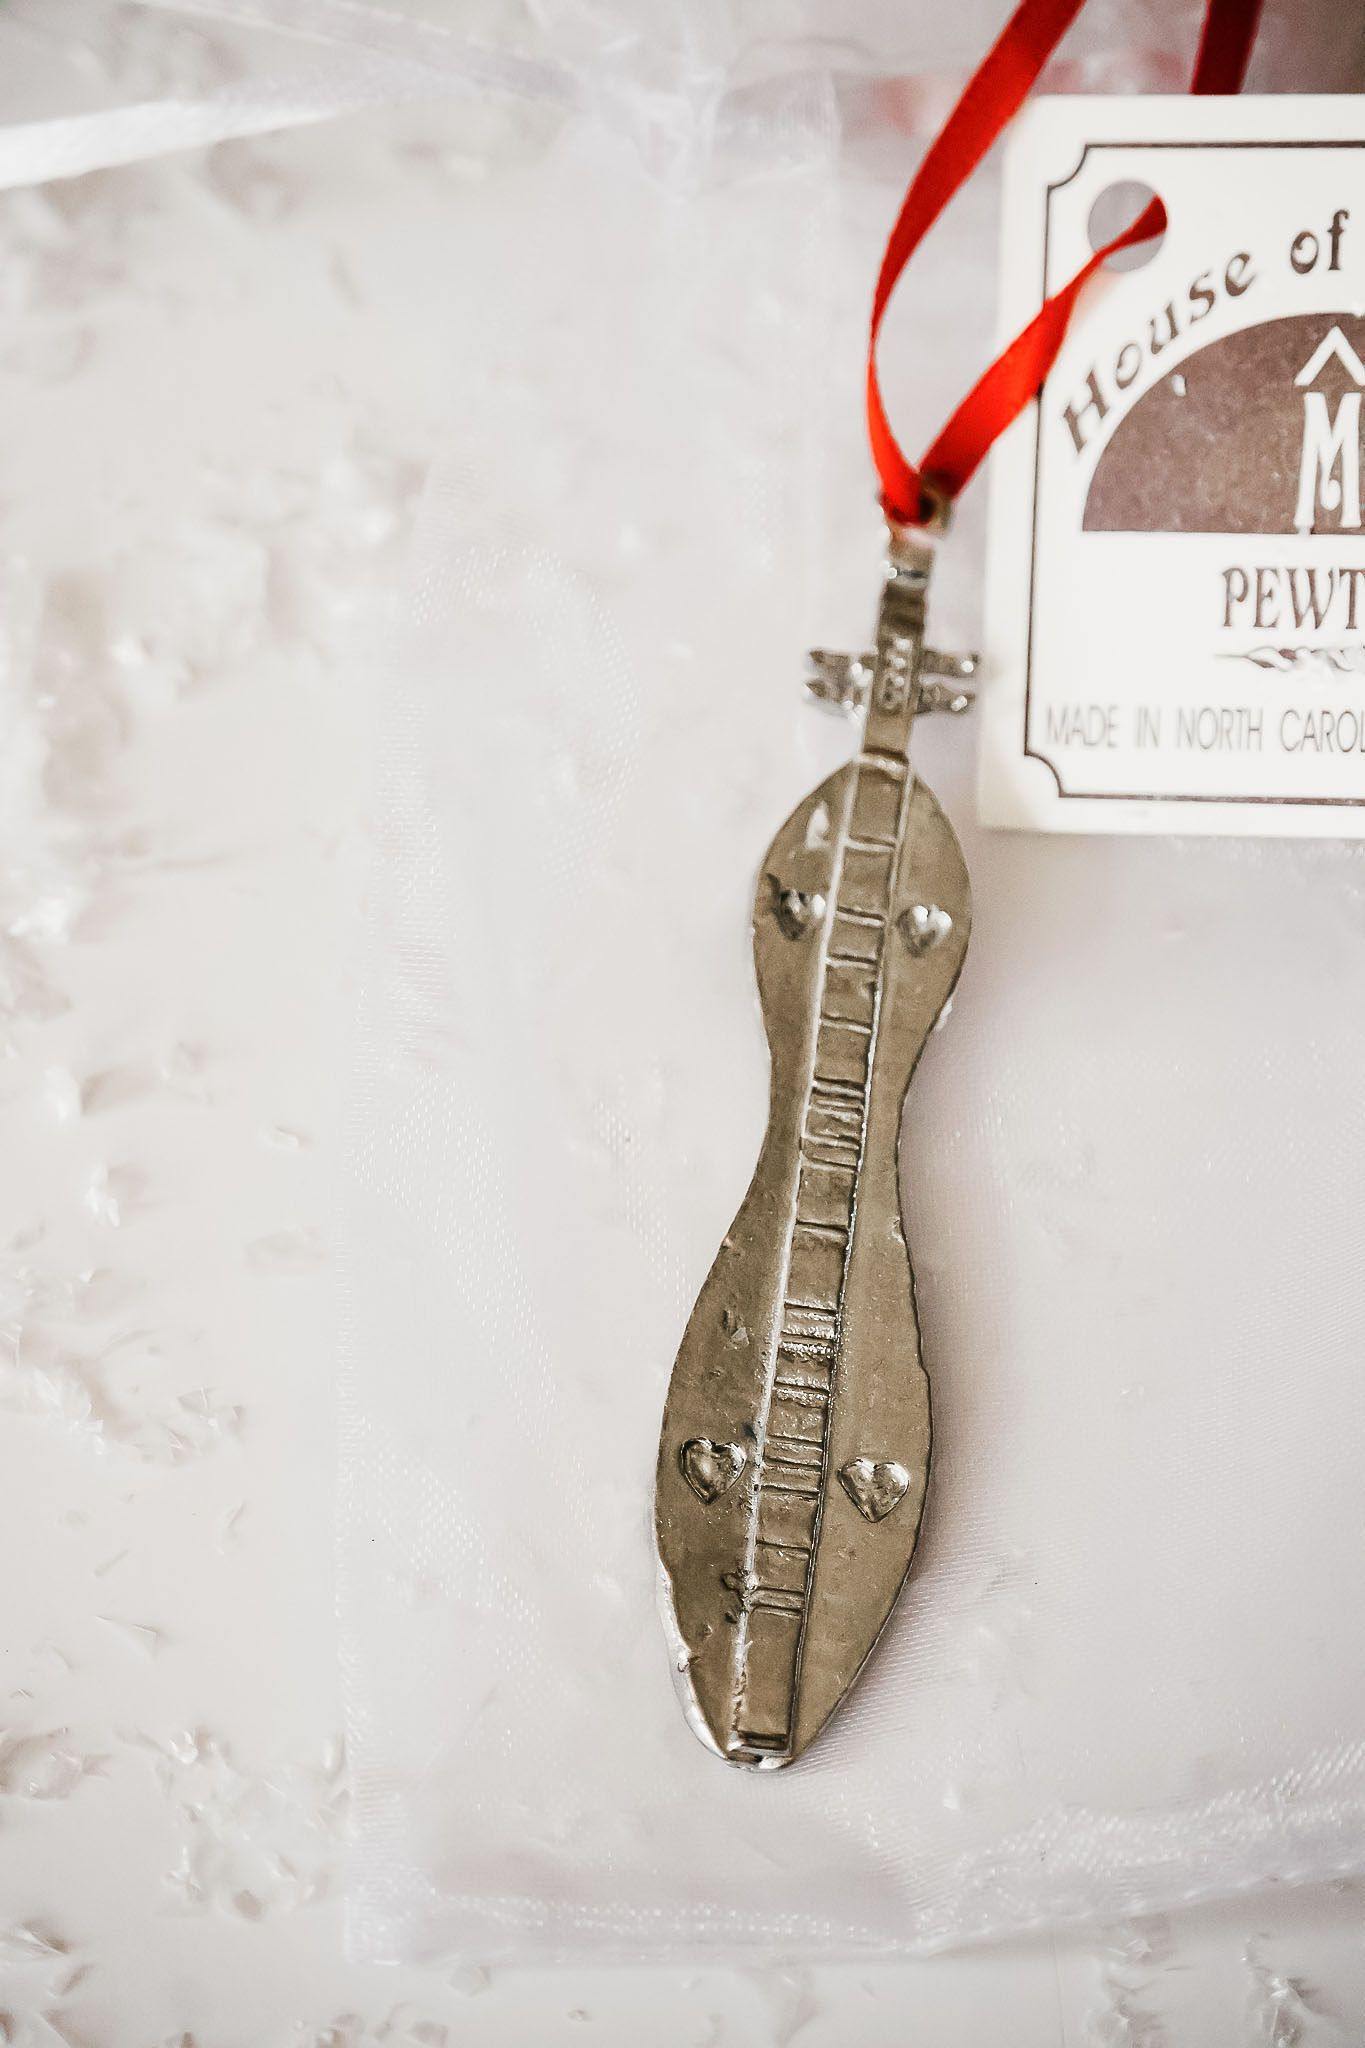 Handmade Pewter Music Instrument Music Note Christmas Ornament Gift - House of Morgan Pewter